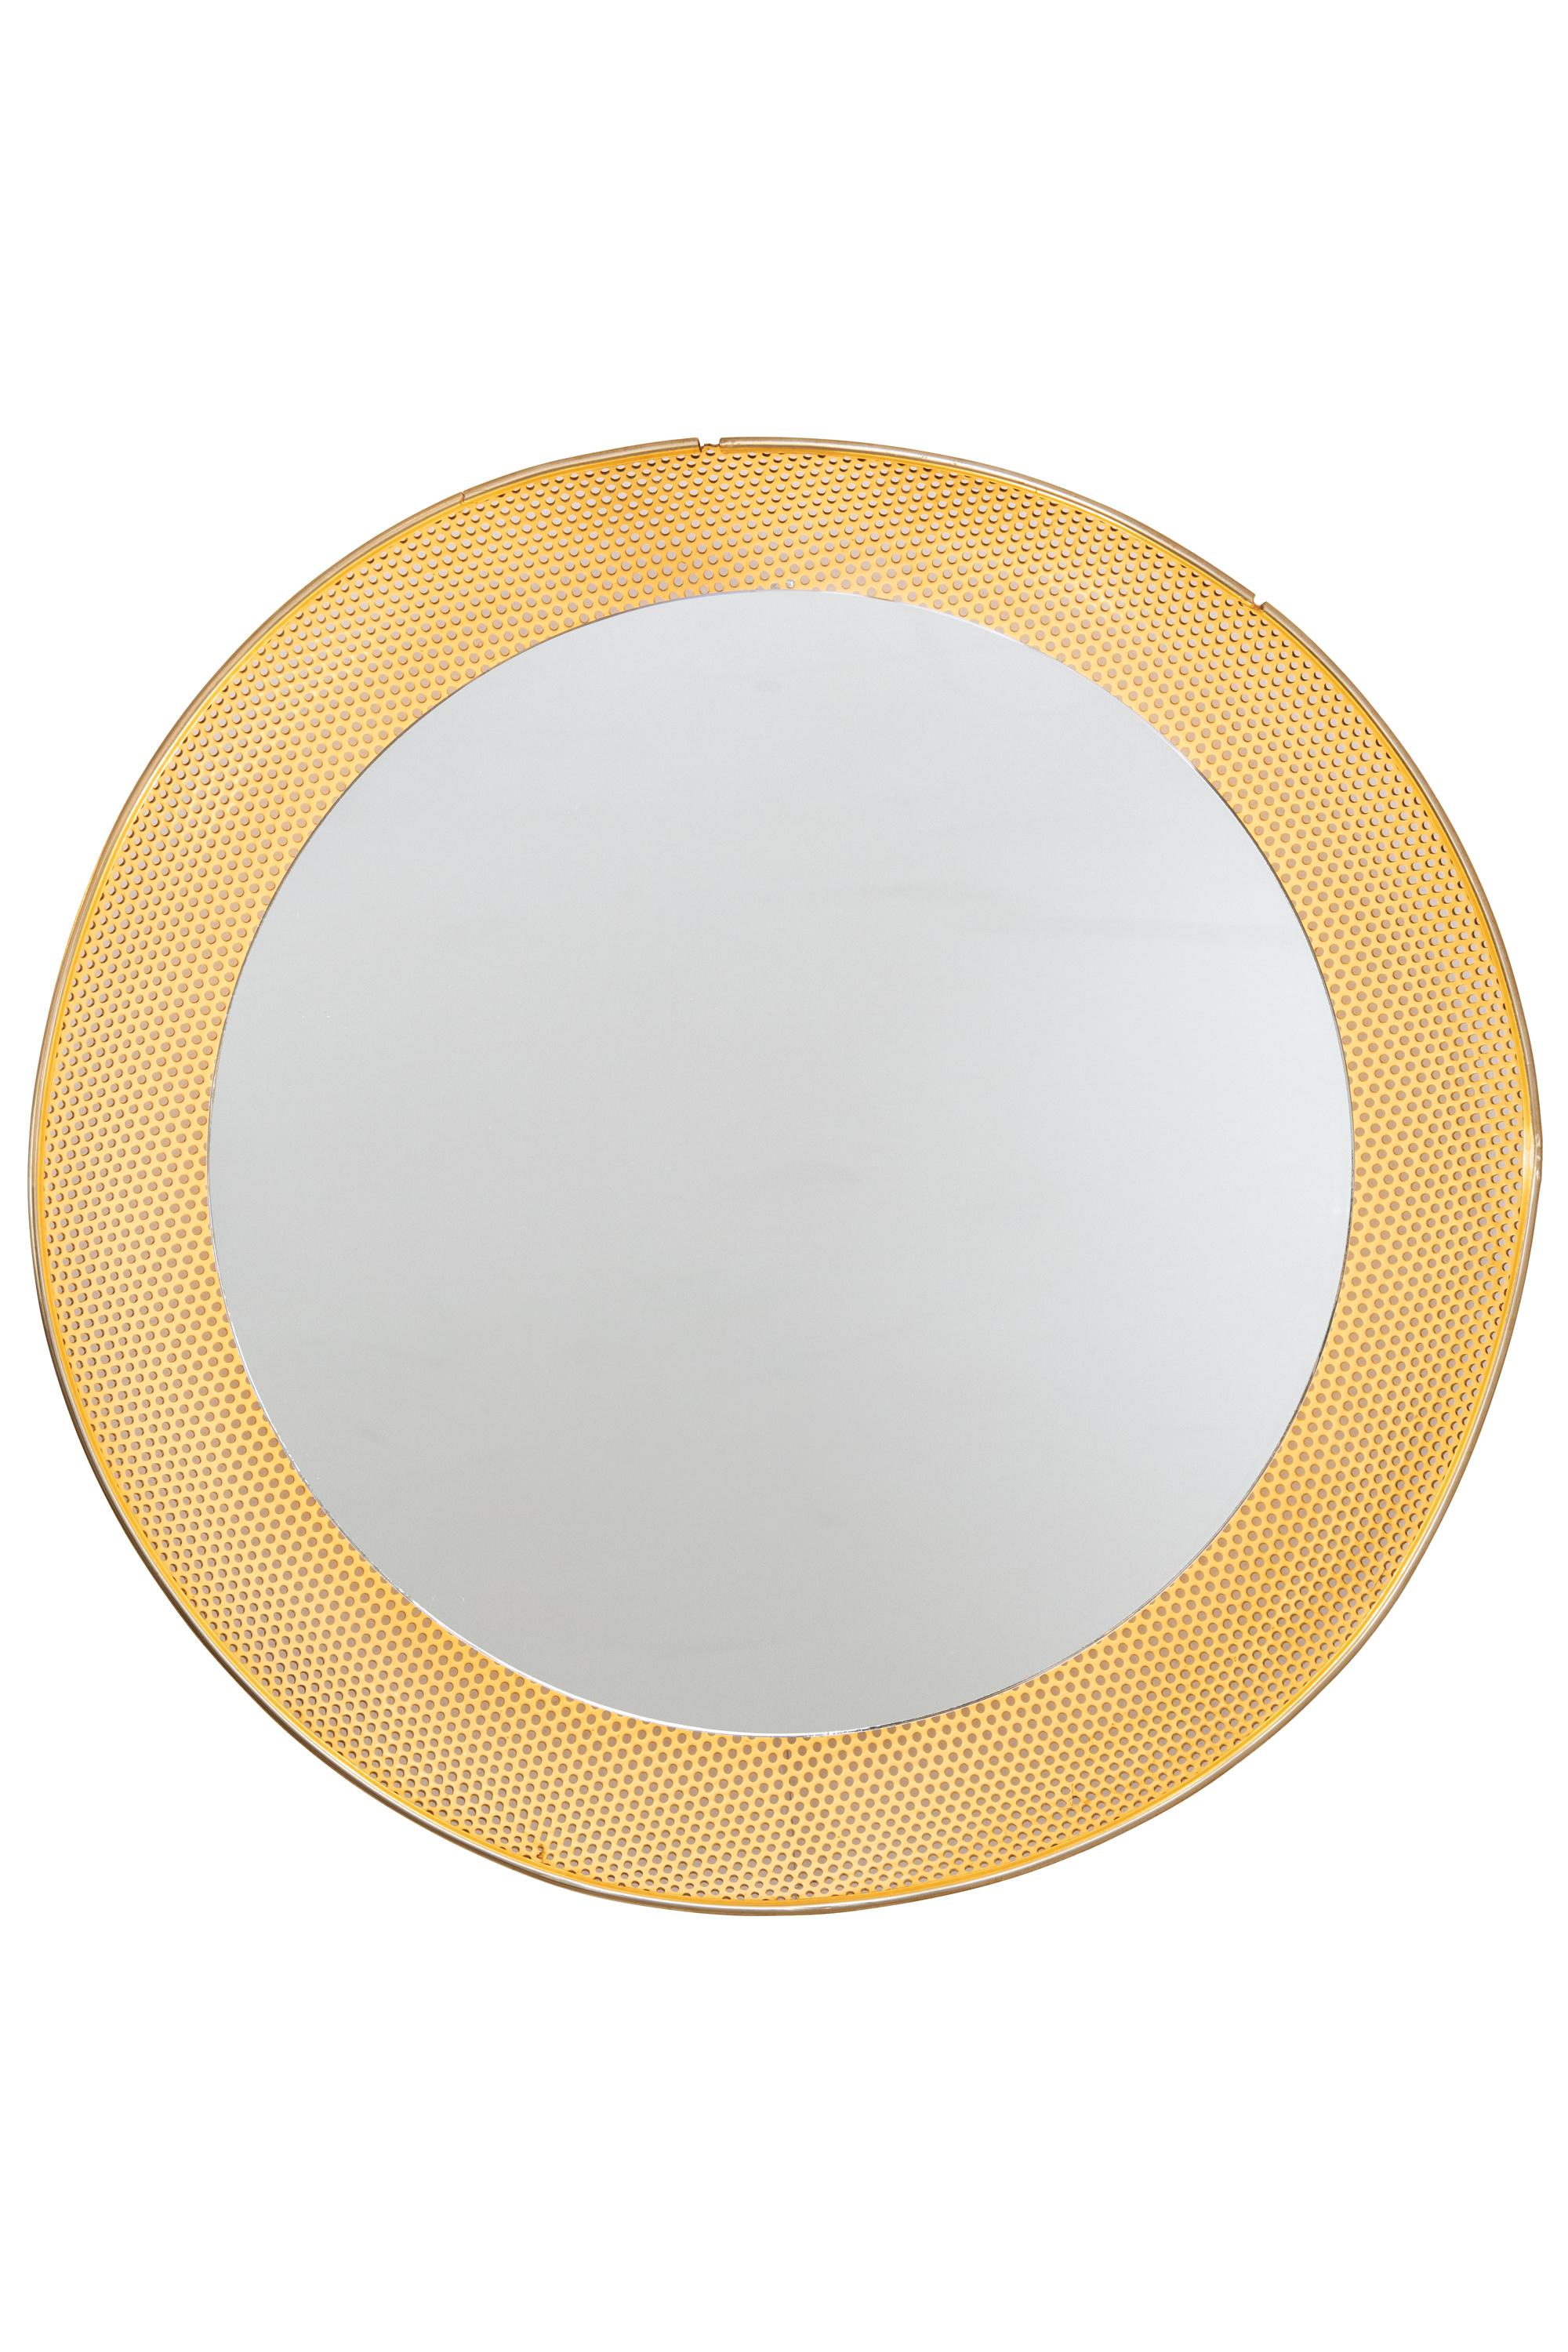 This mirror has a perforated metal frame very much in the style of Mathieu Matégot.